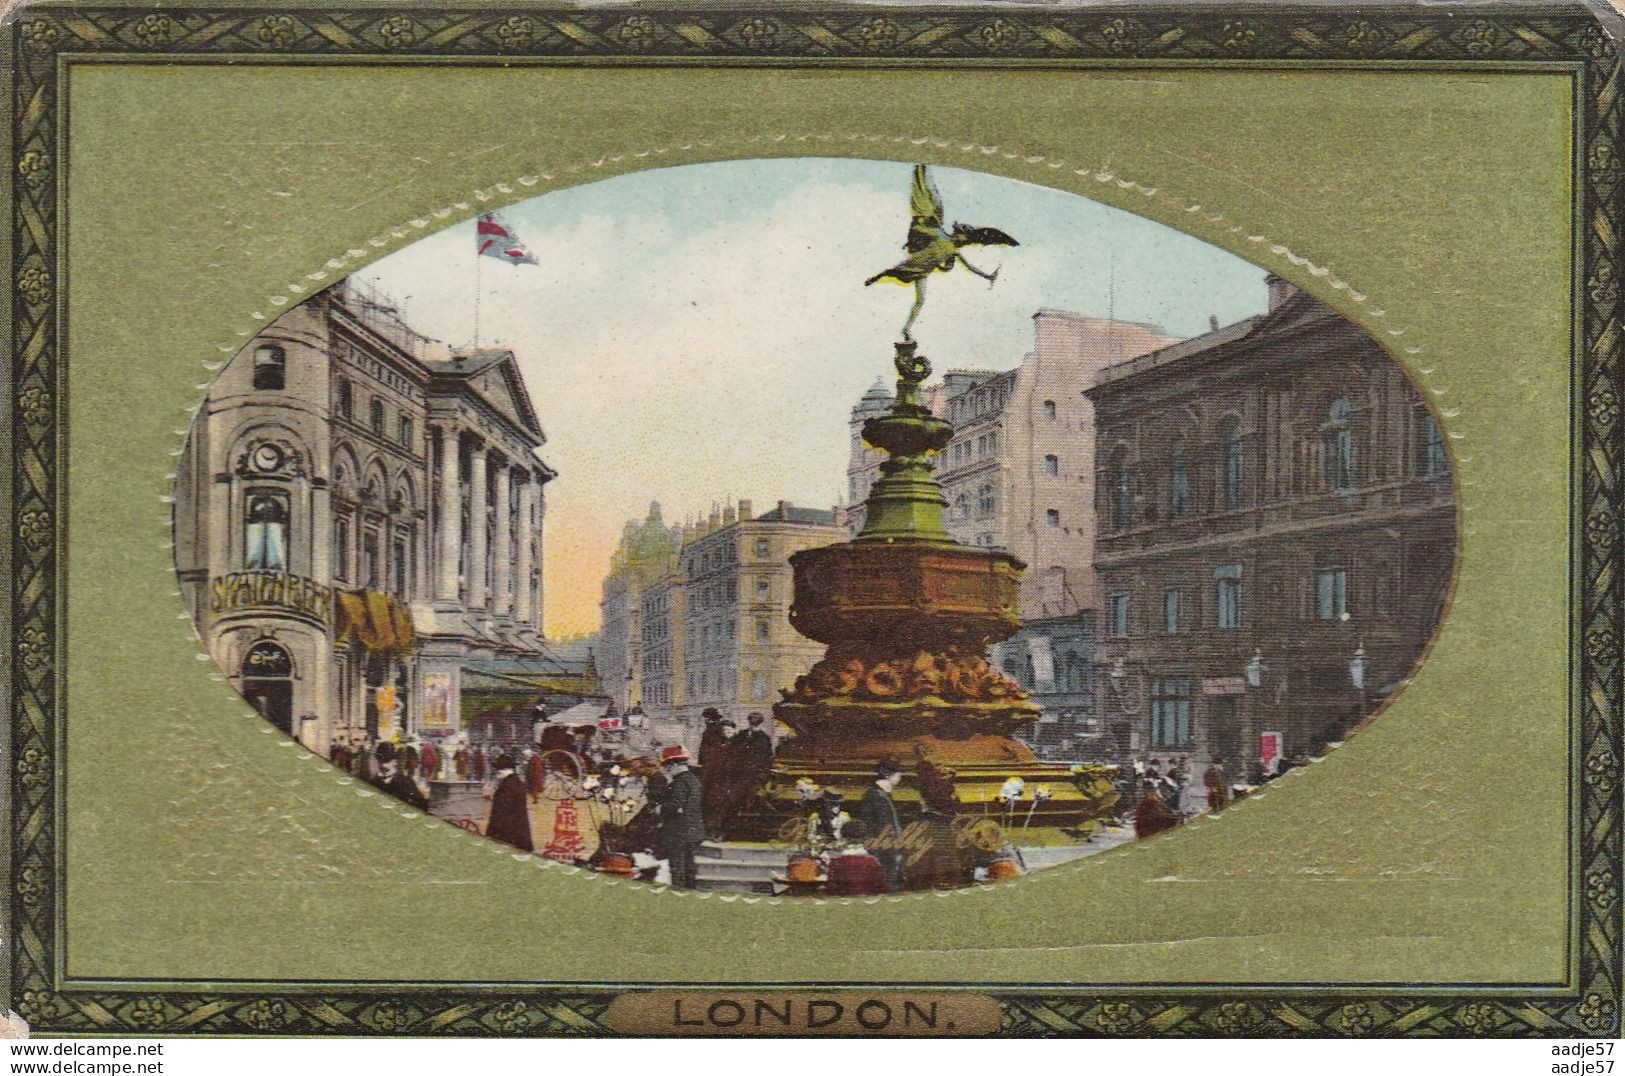 London Piccadilly Circus - Kevelaer